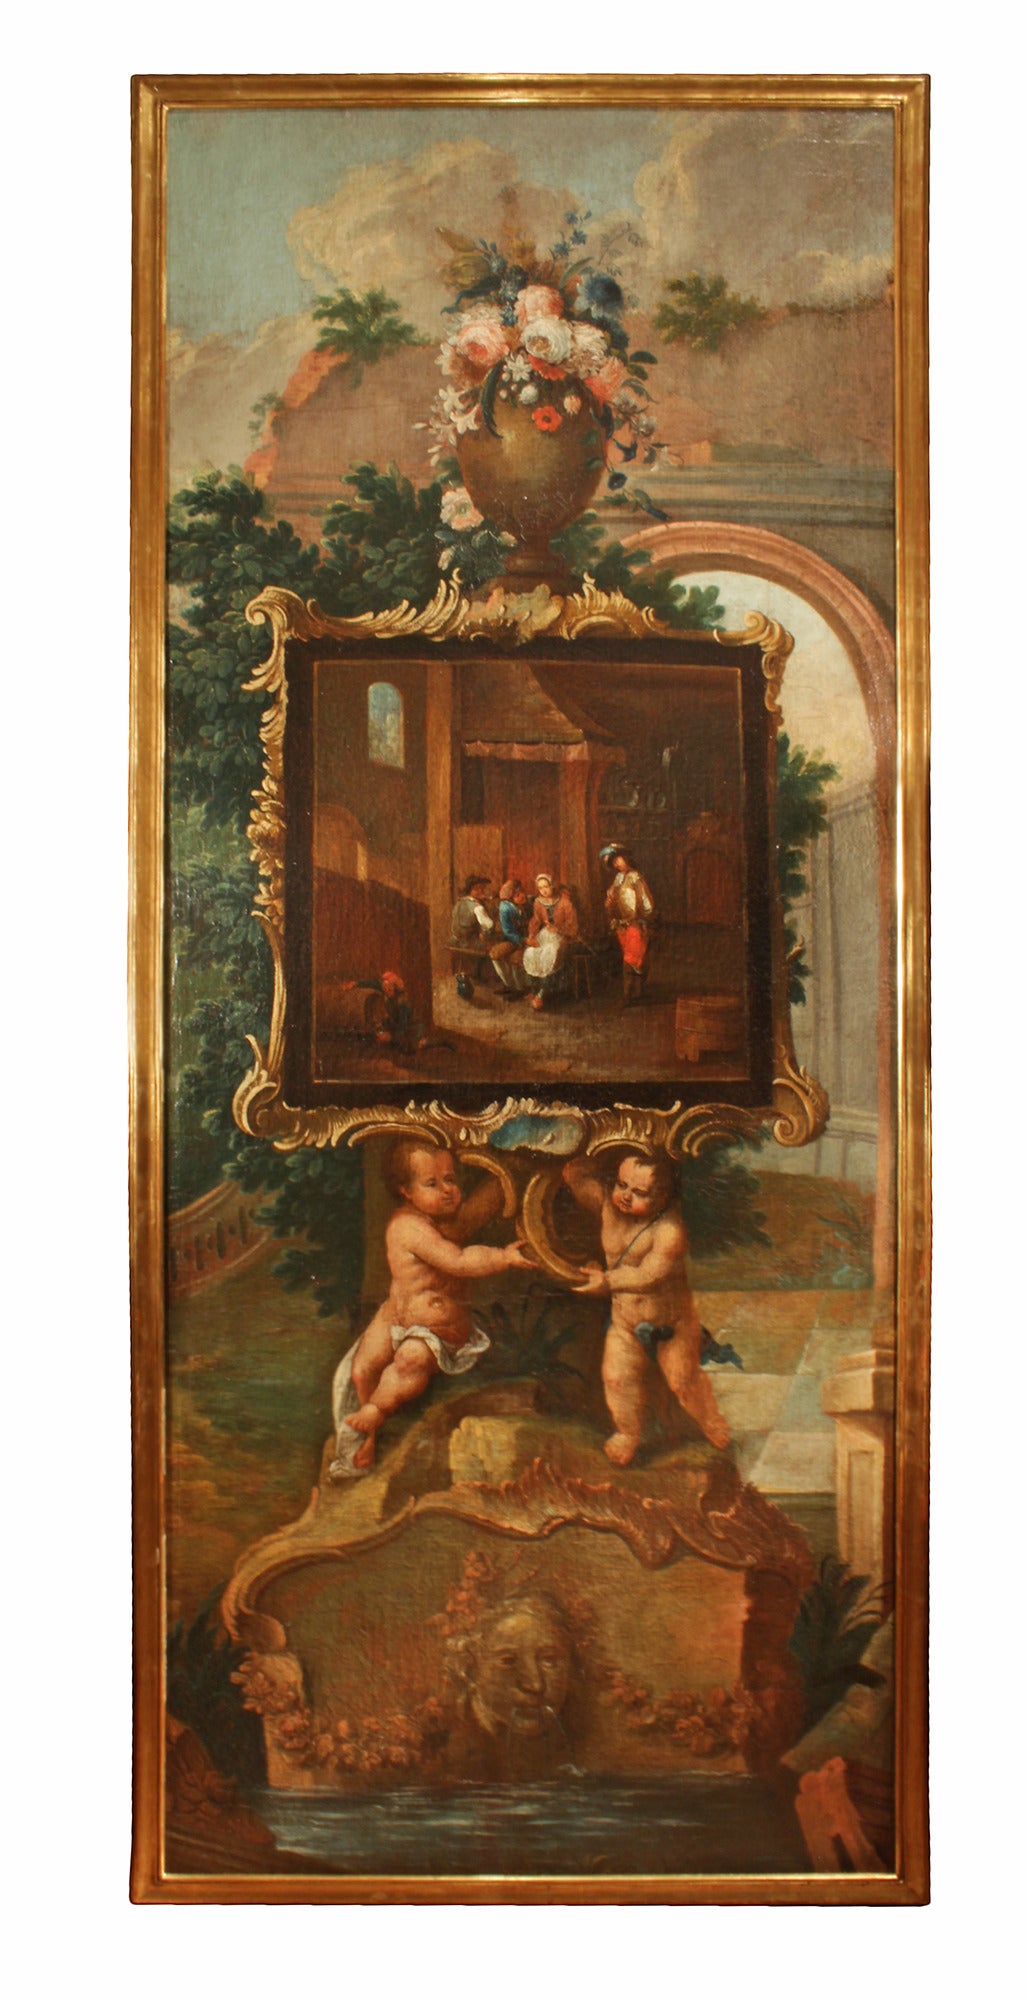 An impressive and unique pair of Baroque 18th century Flemish oil on canvas, signed. Each large-scale painting is within a rectangular giltwood frame. The paintings depict Classic images with very rich color palette and details of fountains in a